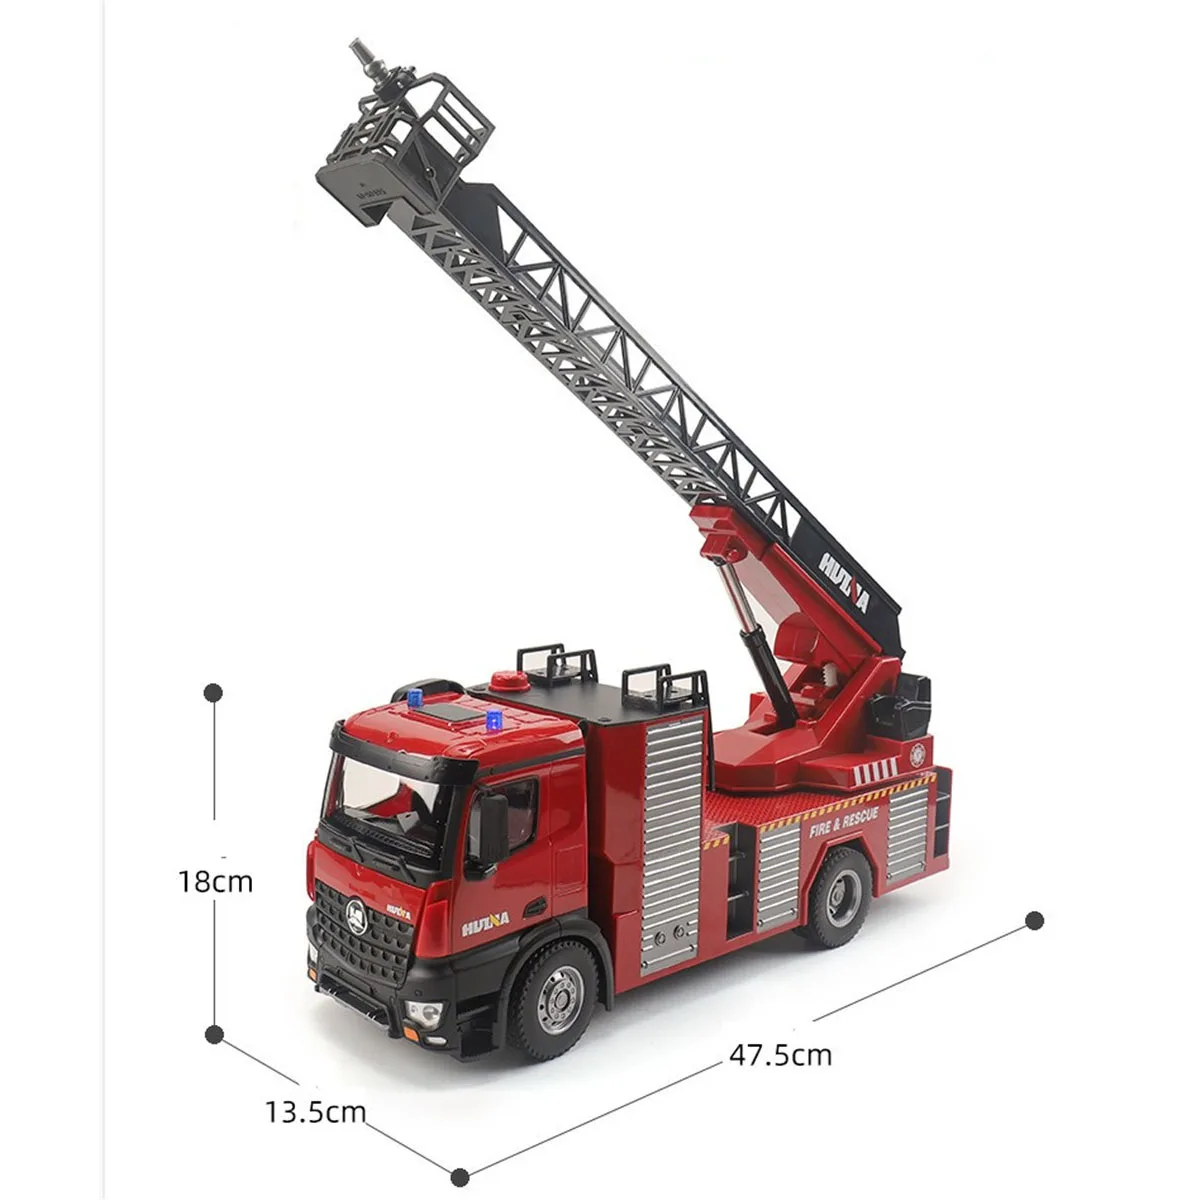 HUINA 1561 RC Truck 22CH RC Ladder Box Water Spray Fire Truck Machine on Remote Control Christmas Gift Crawler Car enlarge